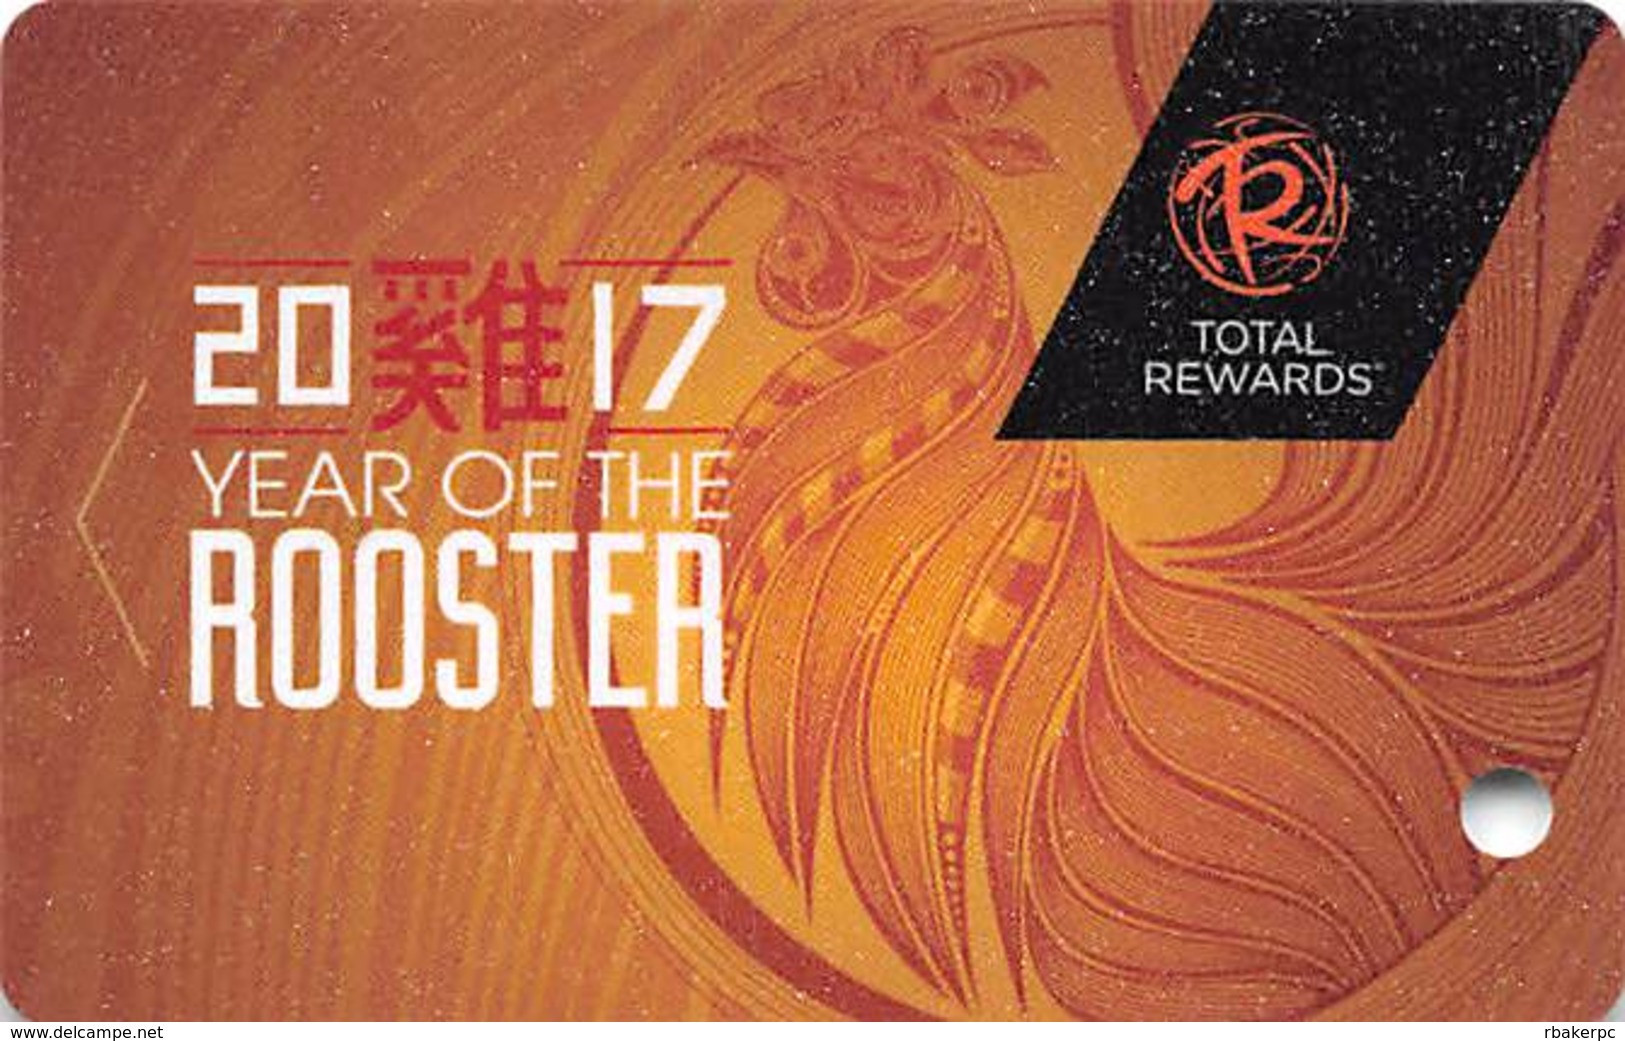 Harrah's Casino Year Of The Rooster 2017 Slot Card BLANK - Casino Cards